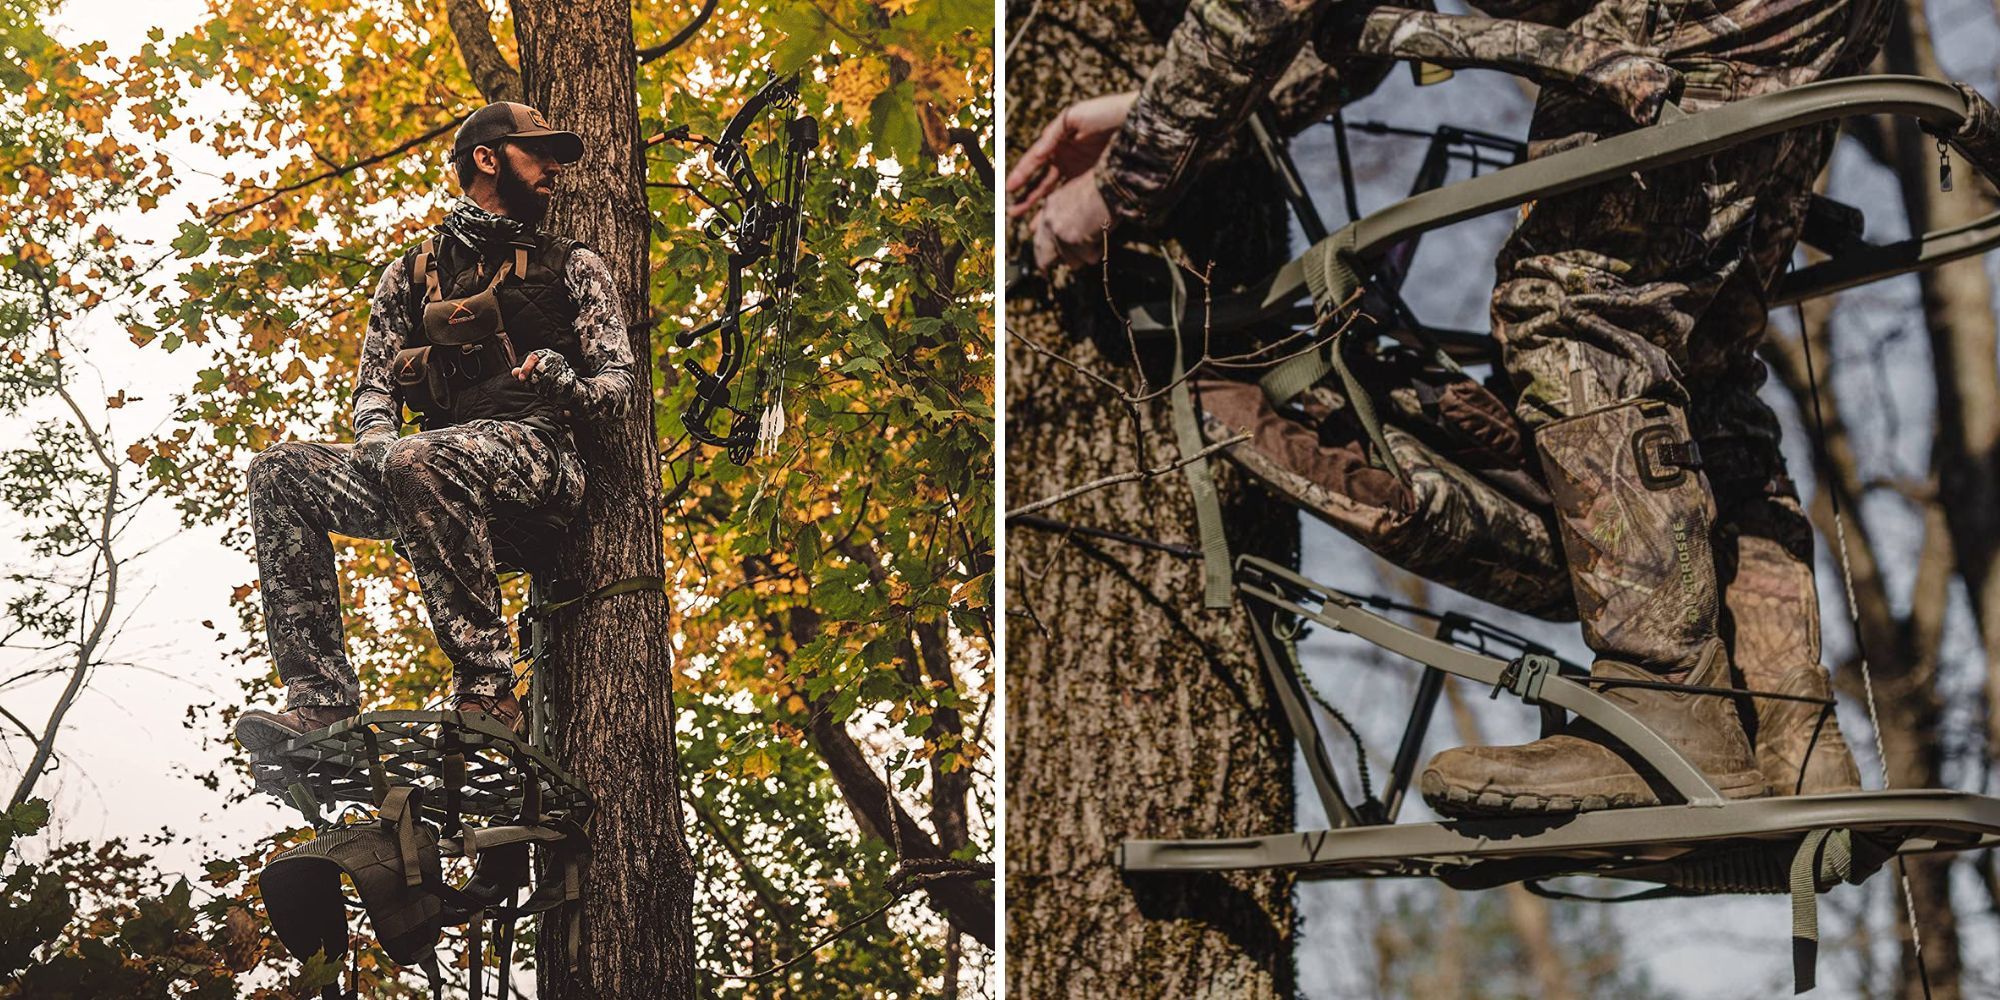 Hang on tree stand for larger hunter